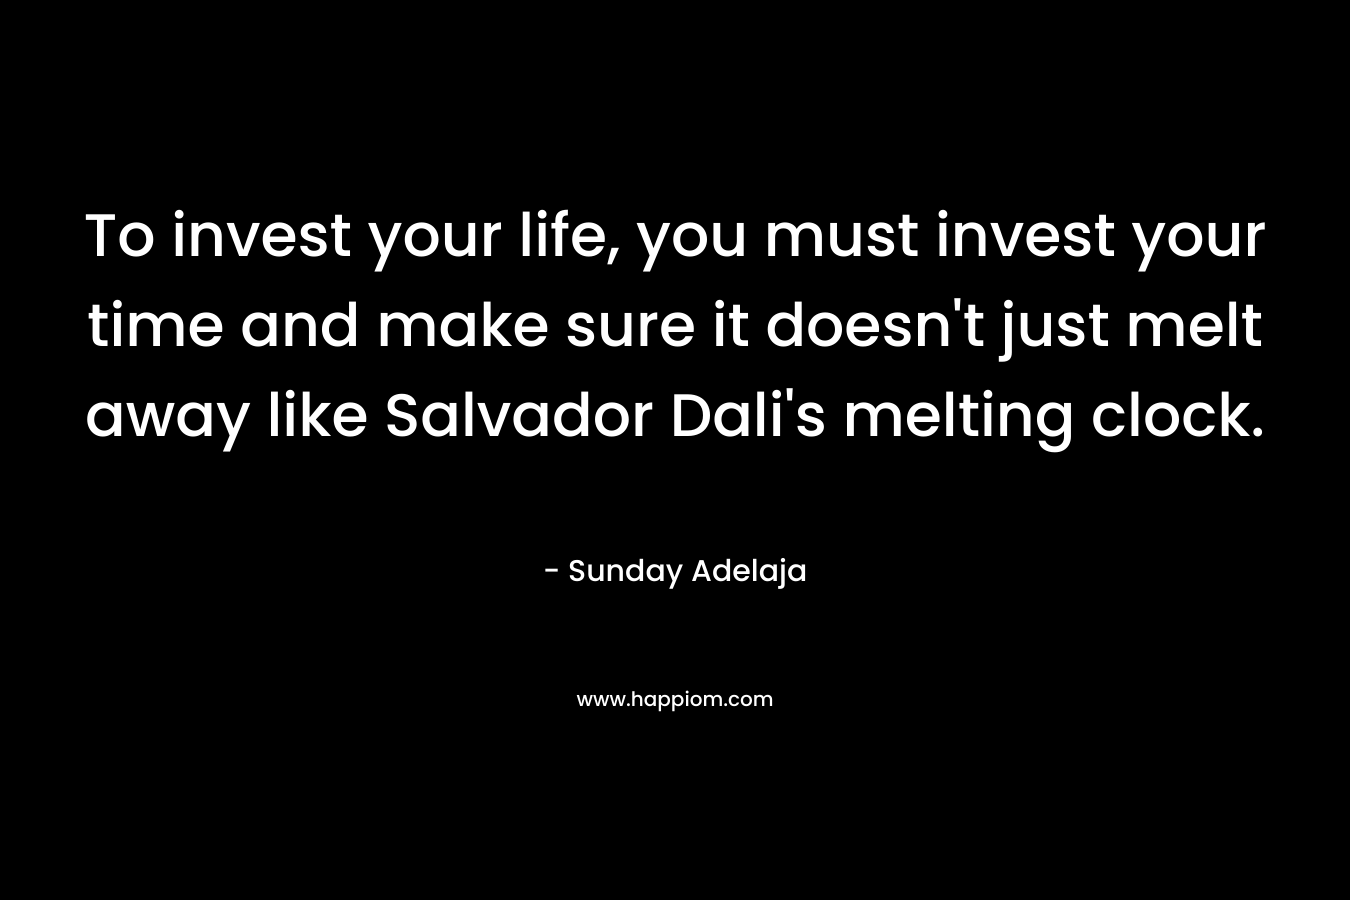 To invest your life, you must invest your time and make sure it doesn't just melt away like Salvador Dali's melting clock.